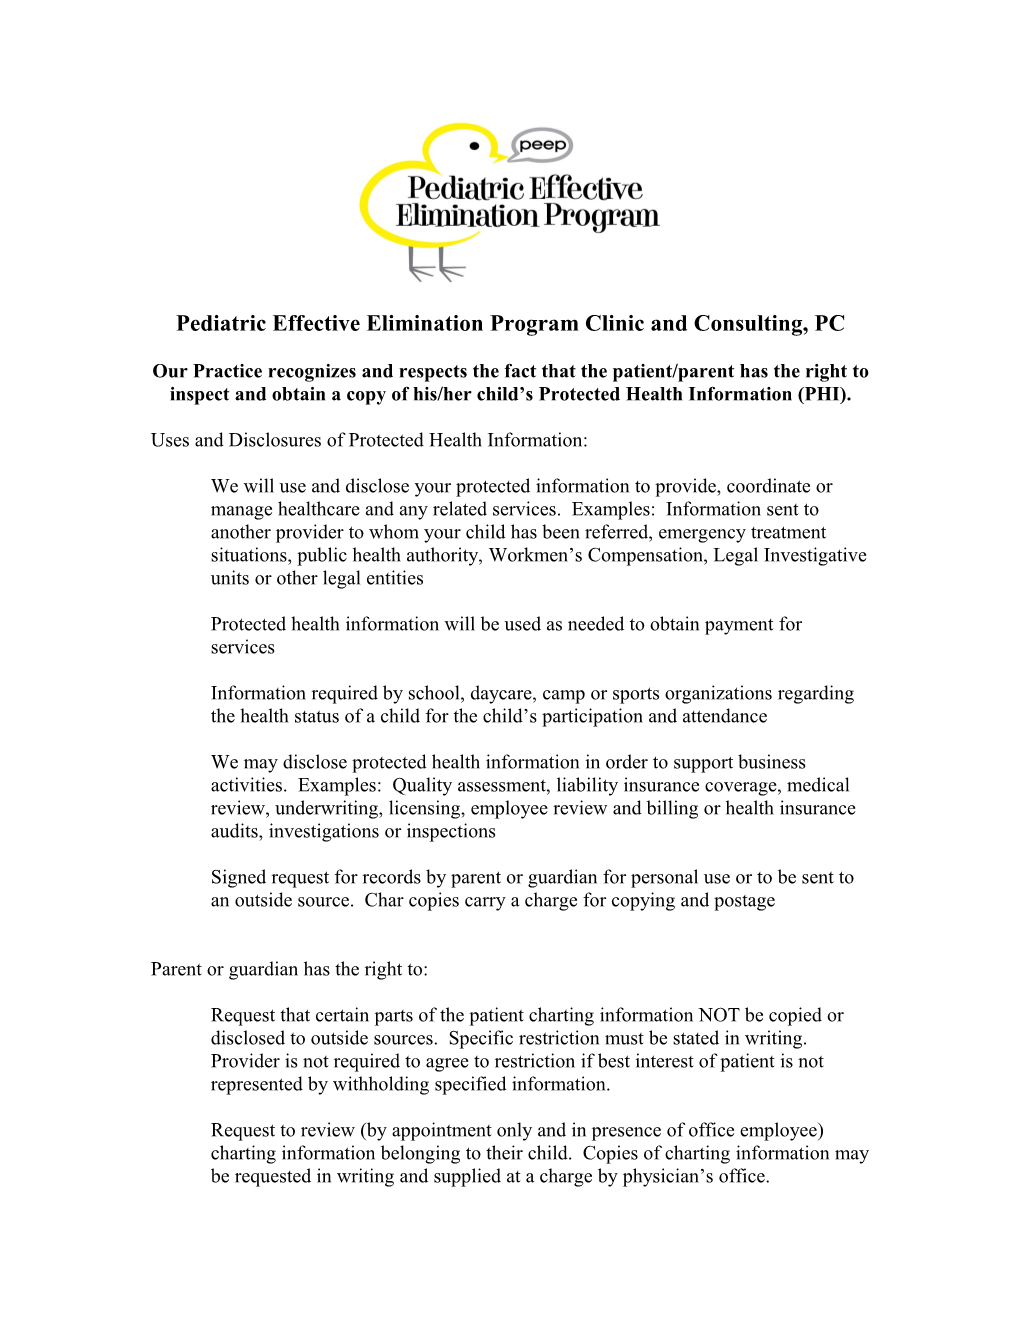 Pediatric Effective Elimination Program Clinic and Consulting, PC